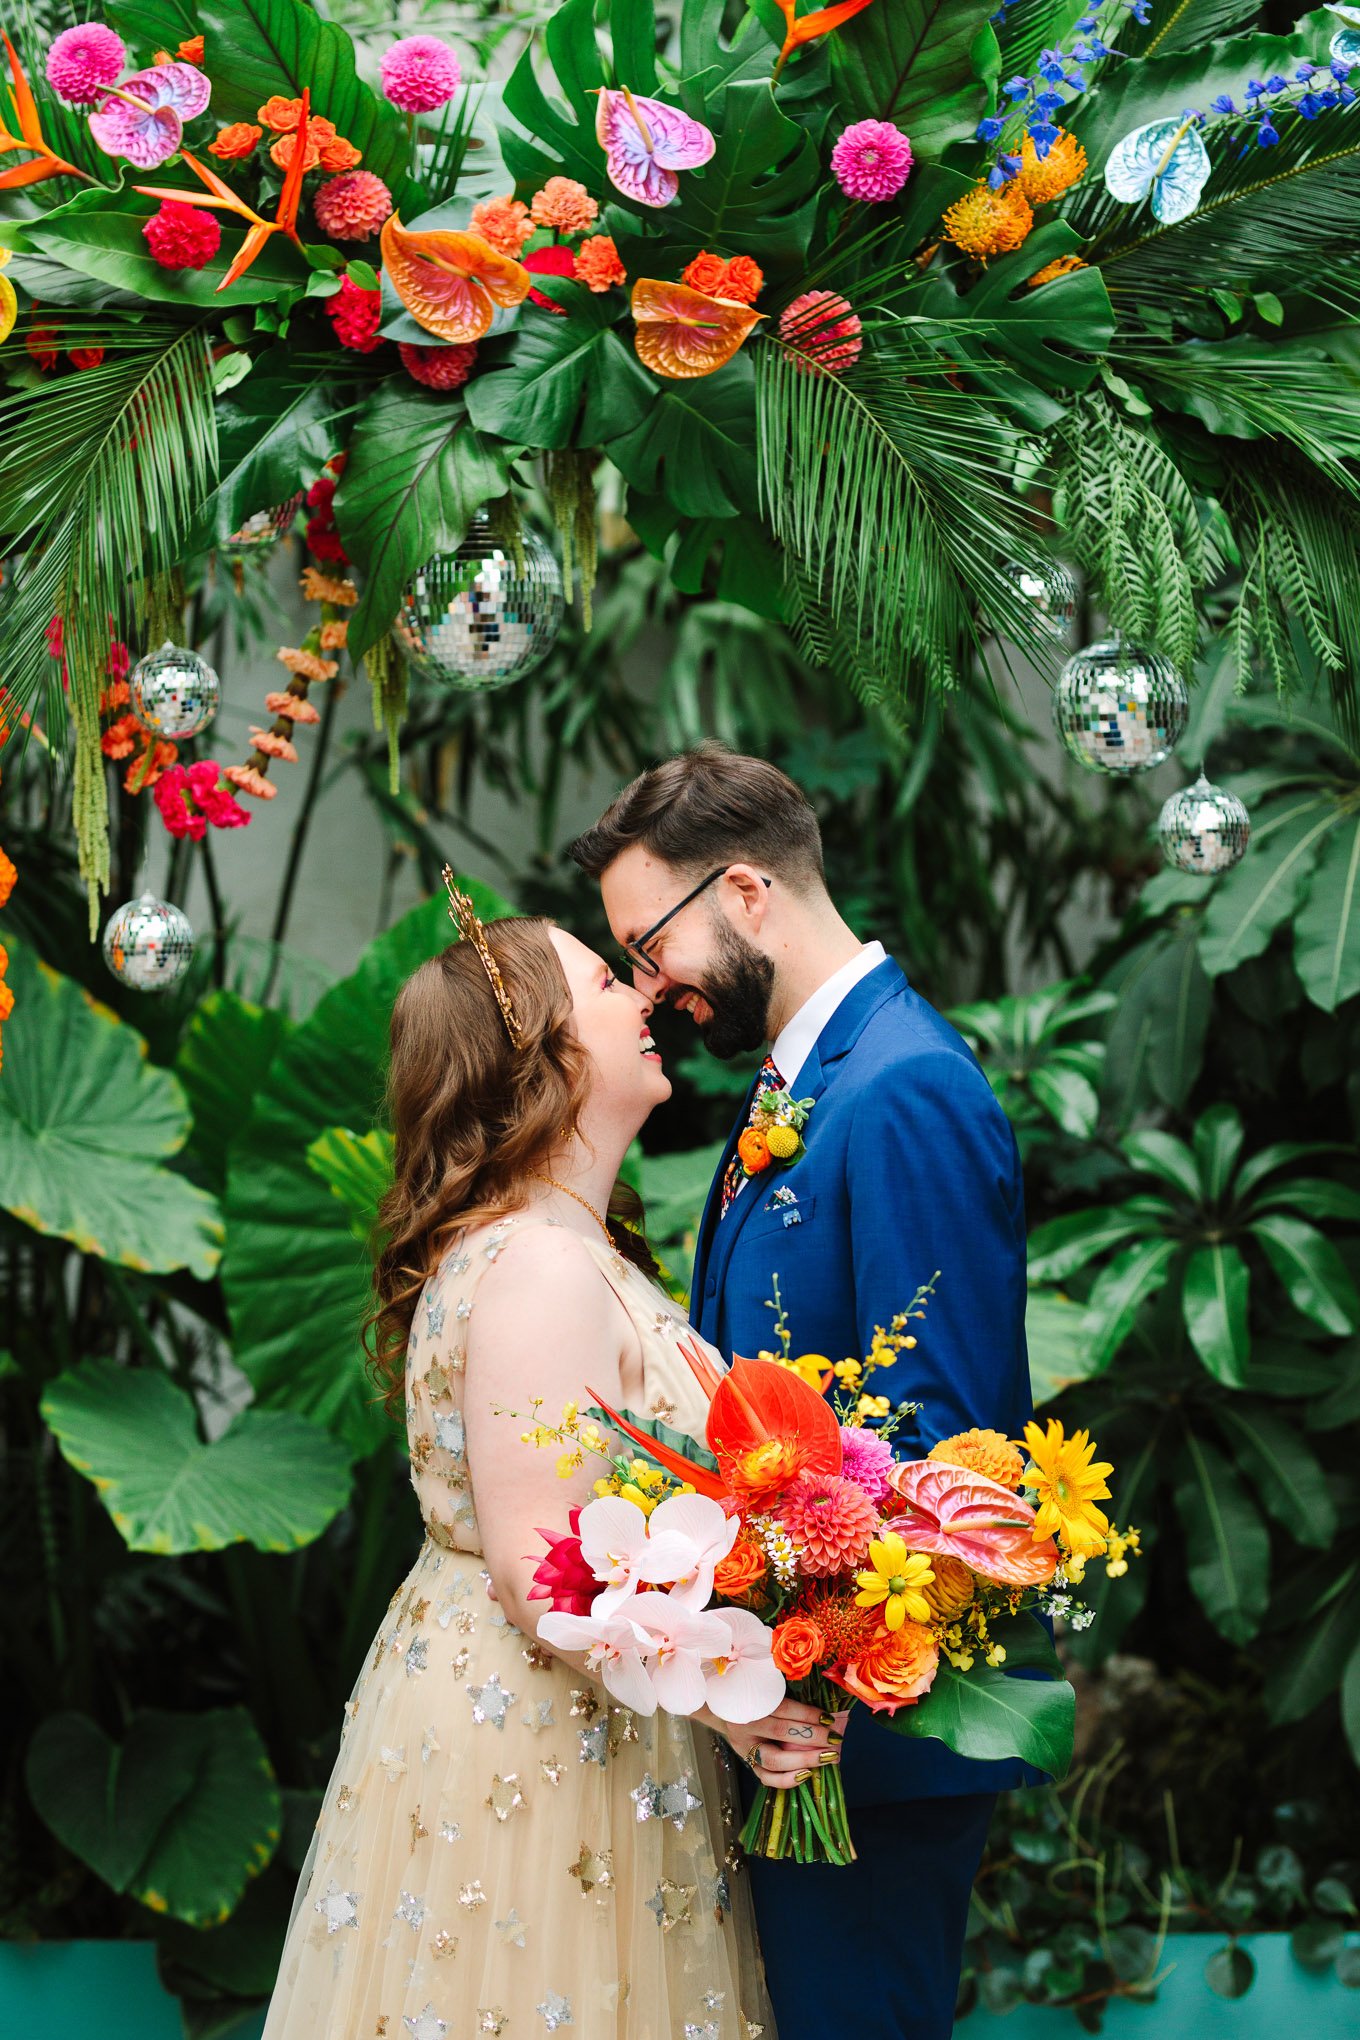 Bride and groom in front of tropical installation | Colorful Downtown Los Angeles Valentine Wedding | Los Angeles wedding photographer | #losangeleswedding #colorfulwedding #DTLA #valentinedtla   Source: Mary Costa Photography | Los Angeles